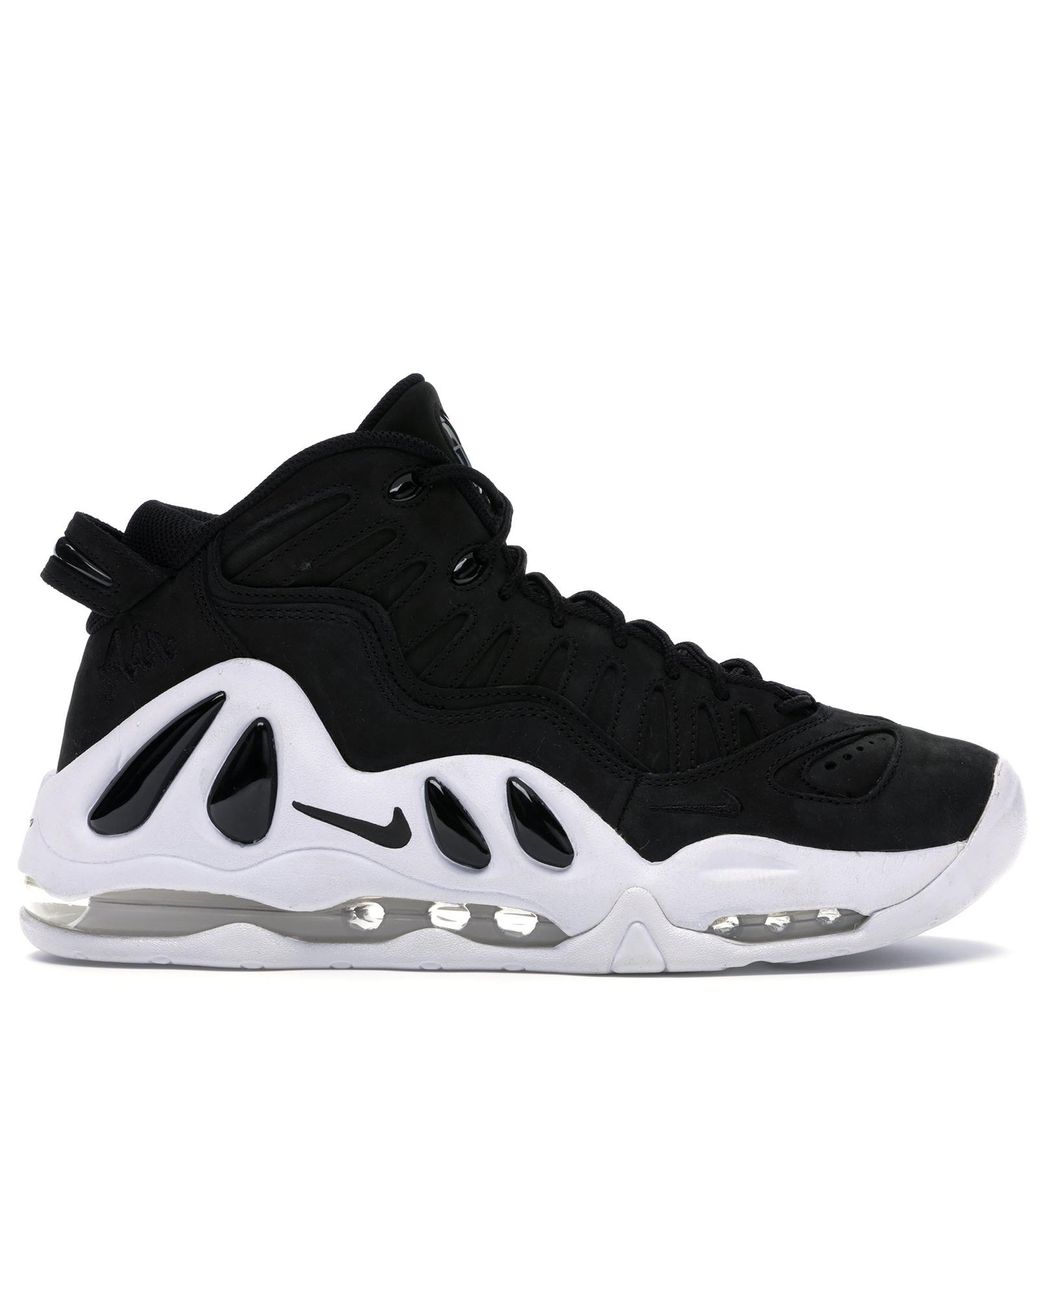 nike air max uptempo 97 for sale